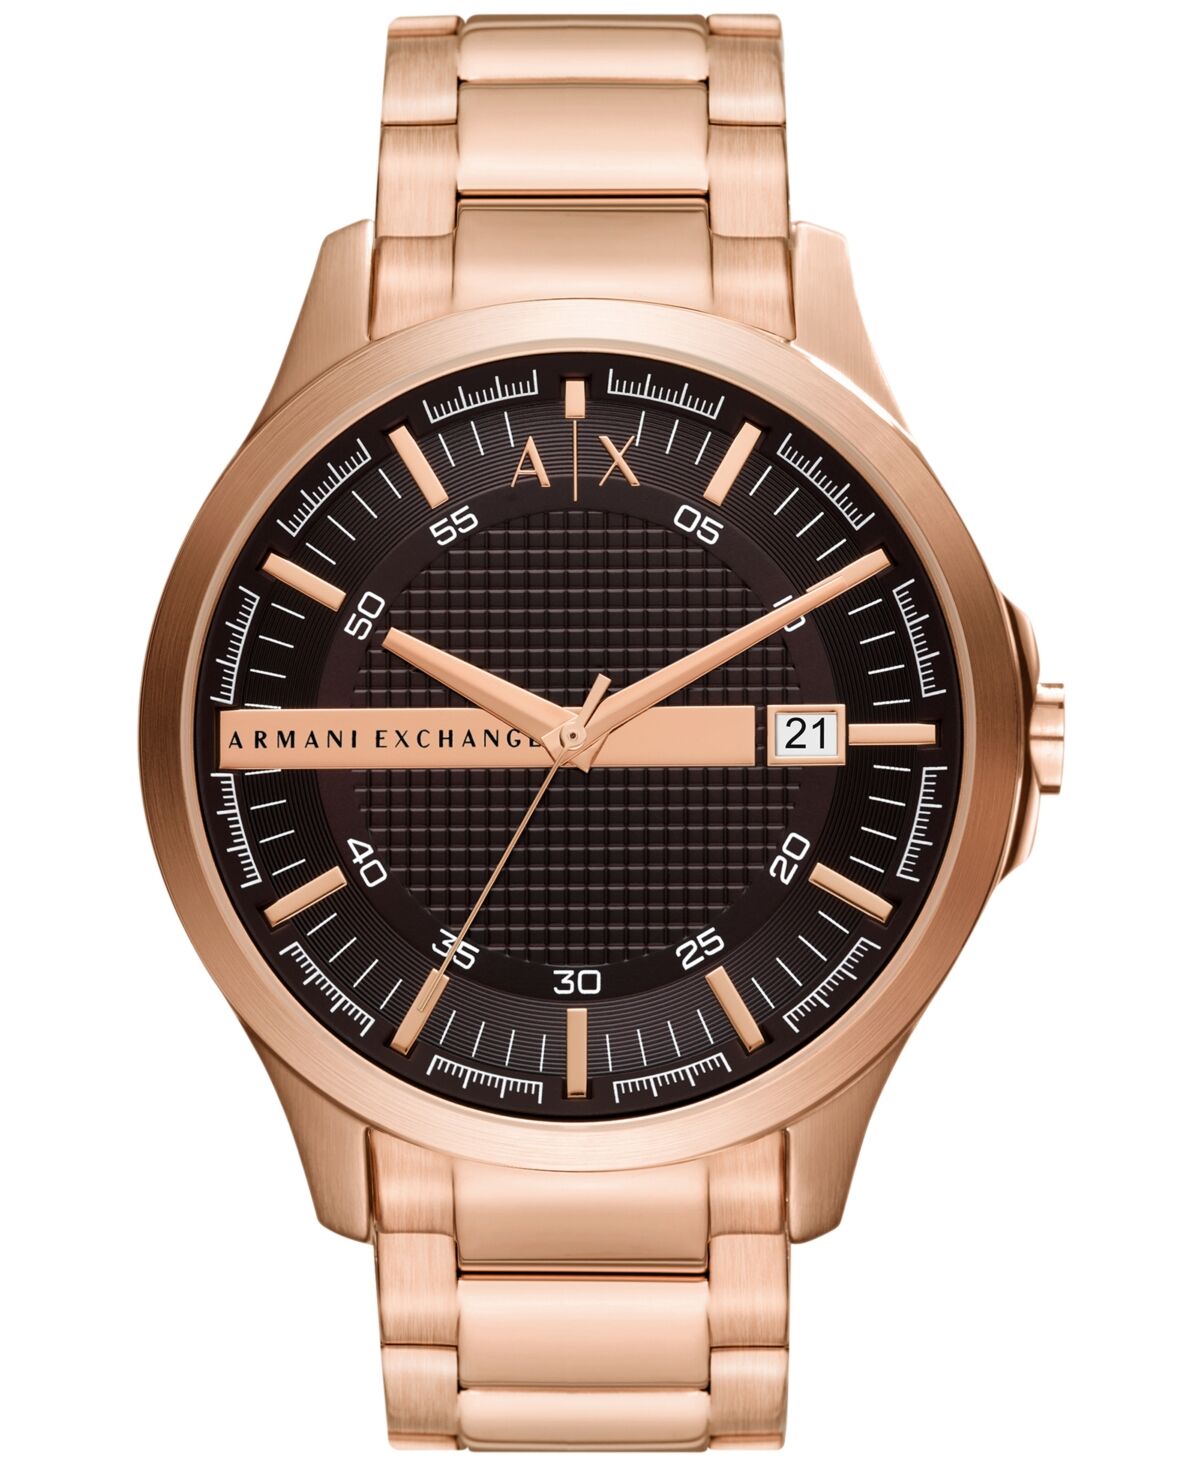 A|x Armani Exchange A X Armani Exchange Men's Three-Hand Quartz Date Rose Gold-Tone Stainless Steel Watch 46mm - Rose Gold